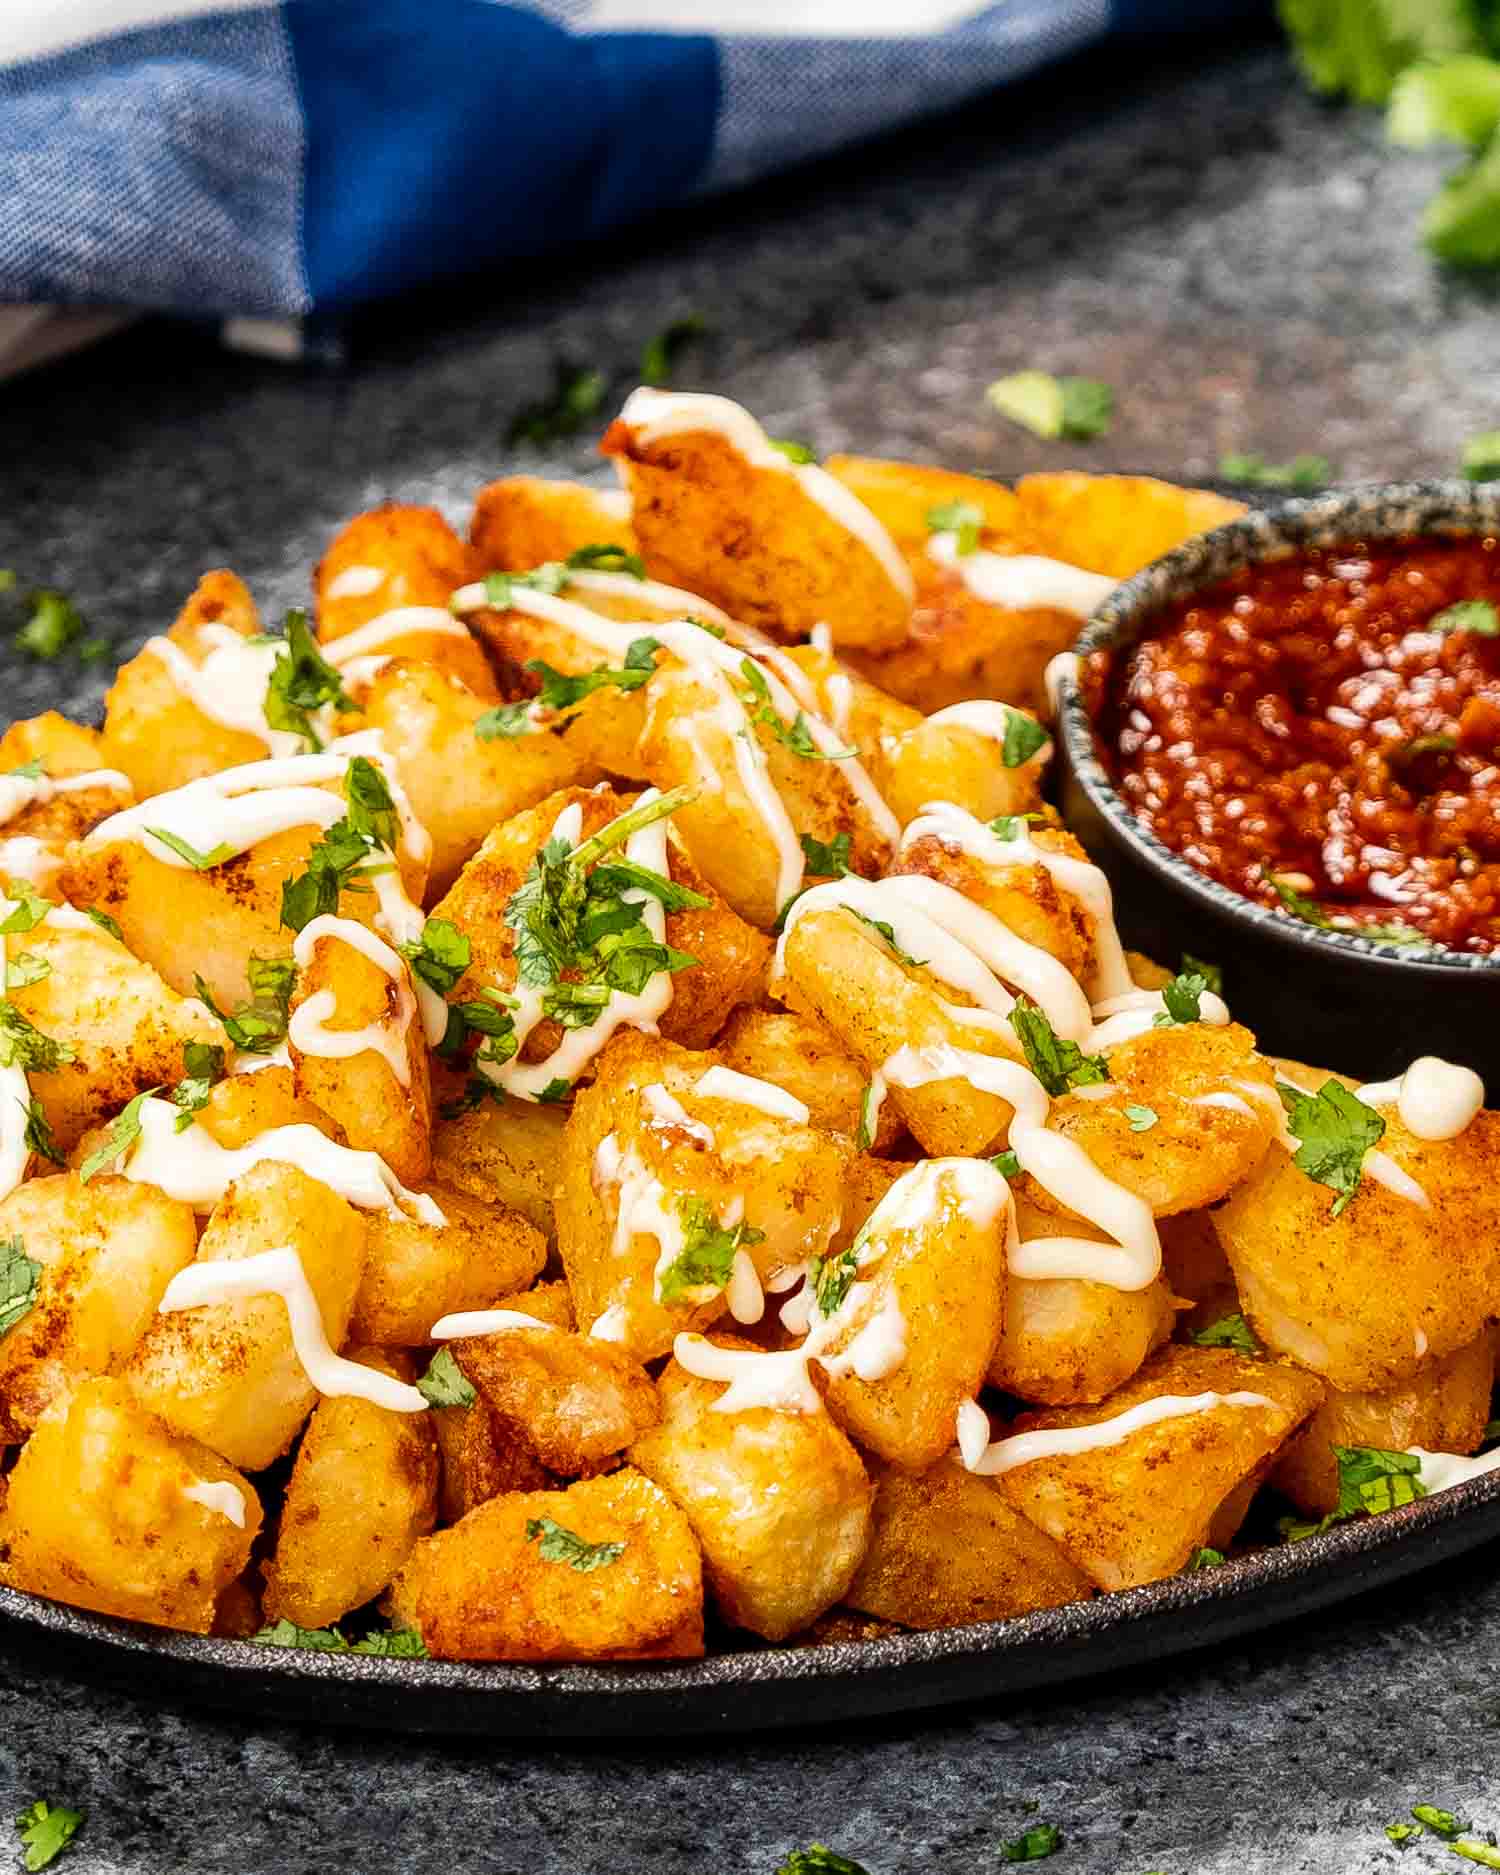 patatas bravas in an oval skillet with spicy red sauce.